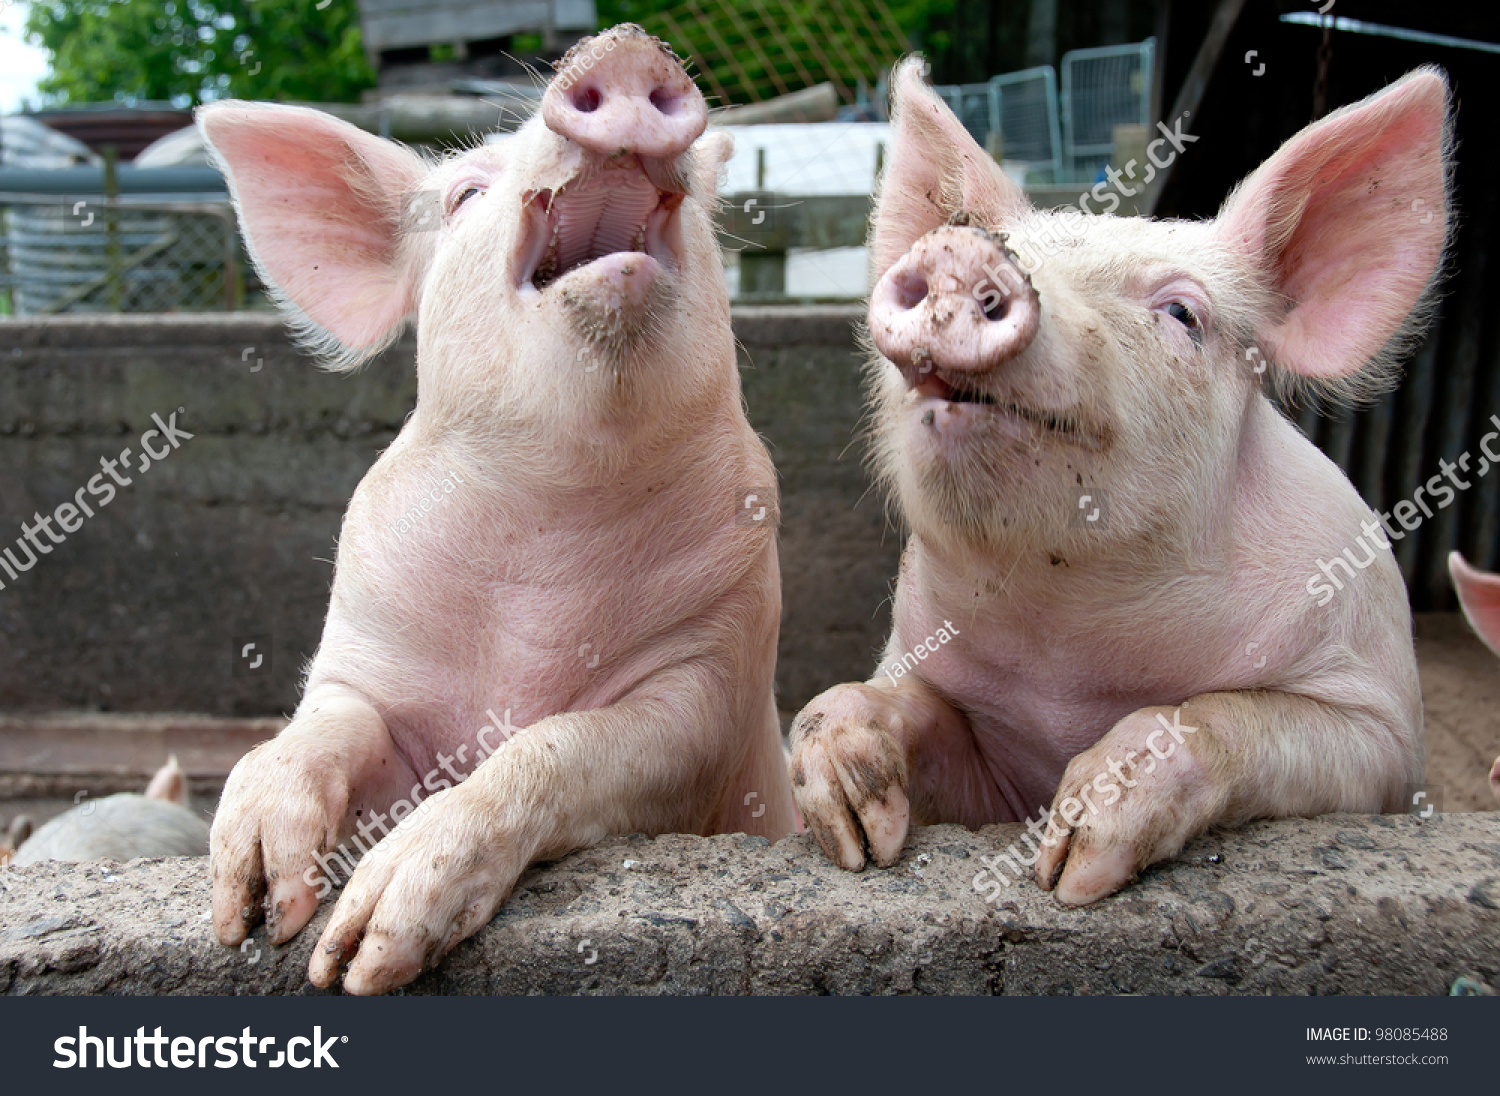 stock-photo-laughing-pigs-on-side-of-pigsty-98085488.jpg